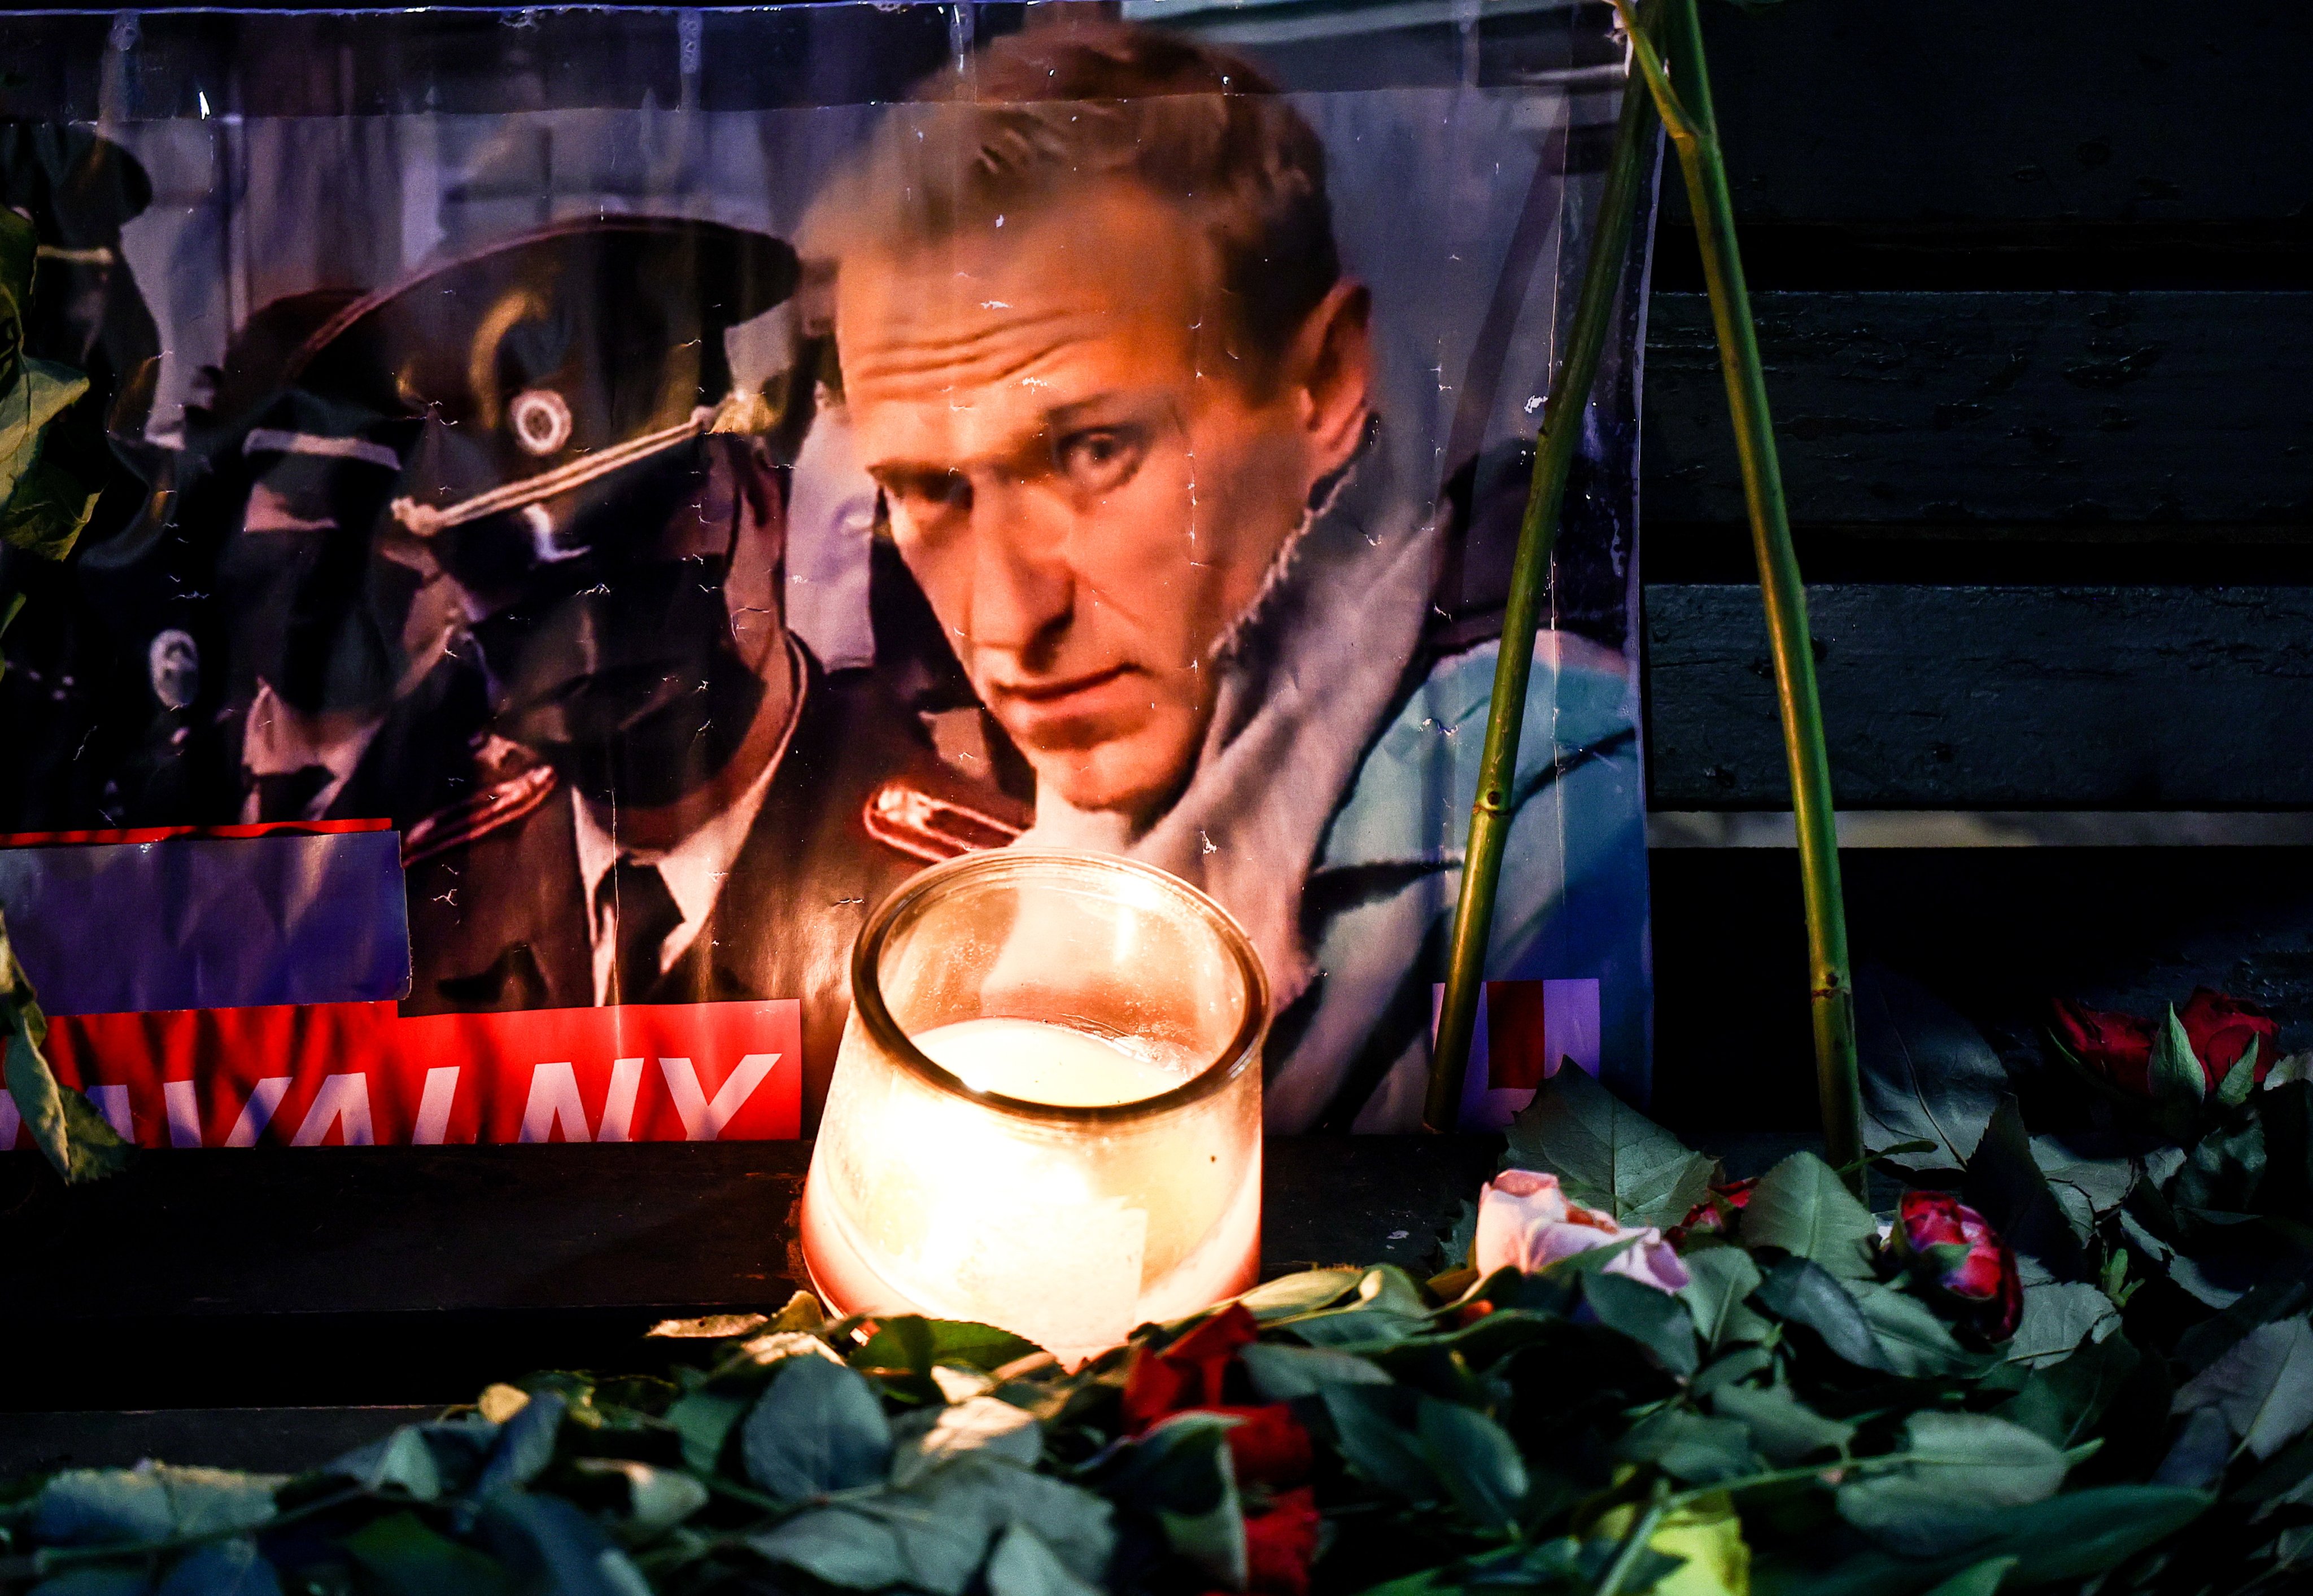 A portrait of late Russian opposition leader Alexei Navalny sits among floral tributes and a candle outside the Russian embassy in Berlin. Navalny’s ally Maria Pevchikh said she had confirmation that negotiations for the swap were in their final stages on the evening of February 15. Photo: EPA-EFE